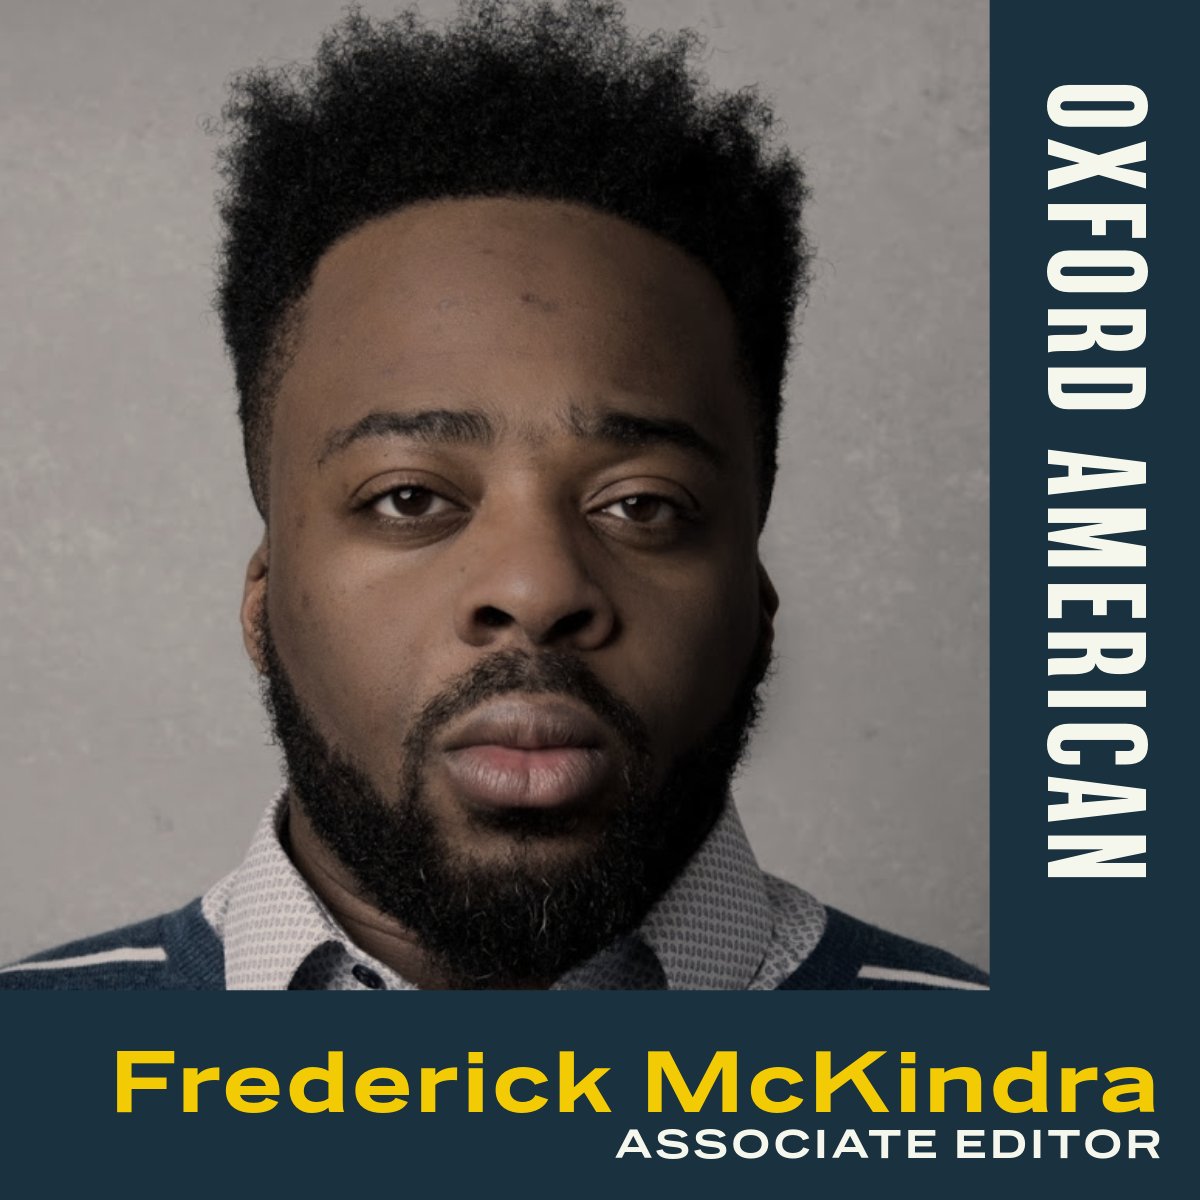 We’re thrilled to welcome Frederick McKindra (@boxfade) to the OA team as a new associate editor!